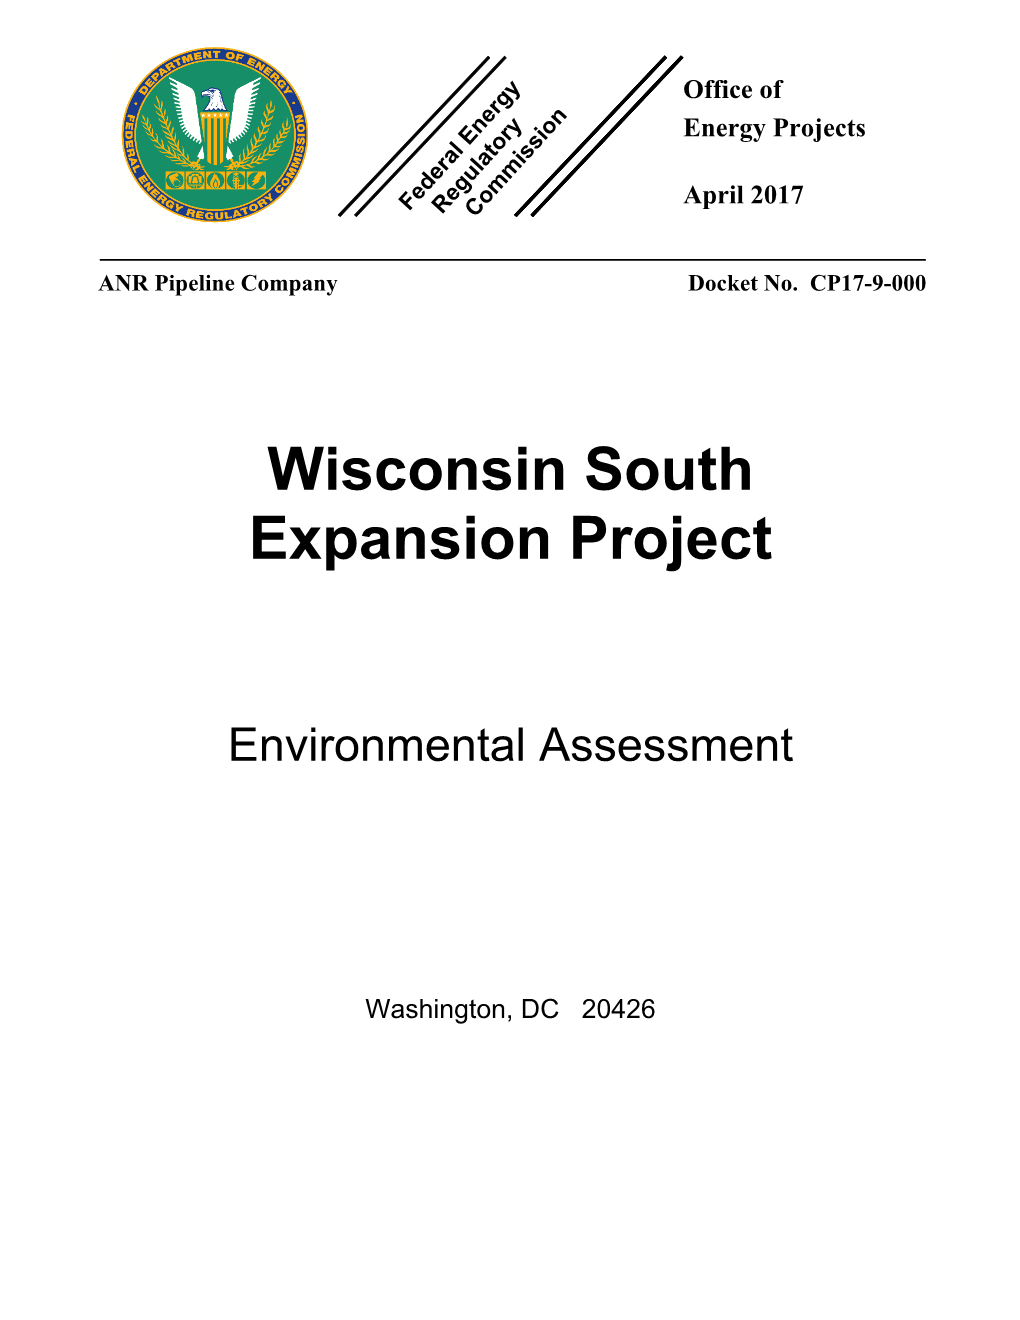 Wisconsin South Expansion Project